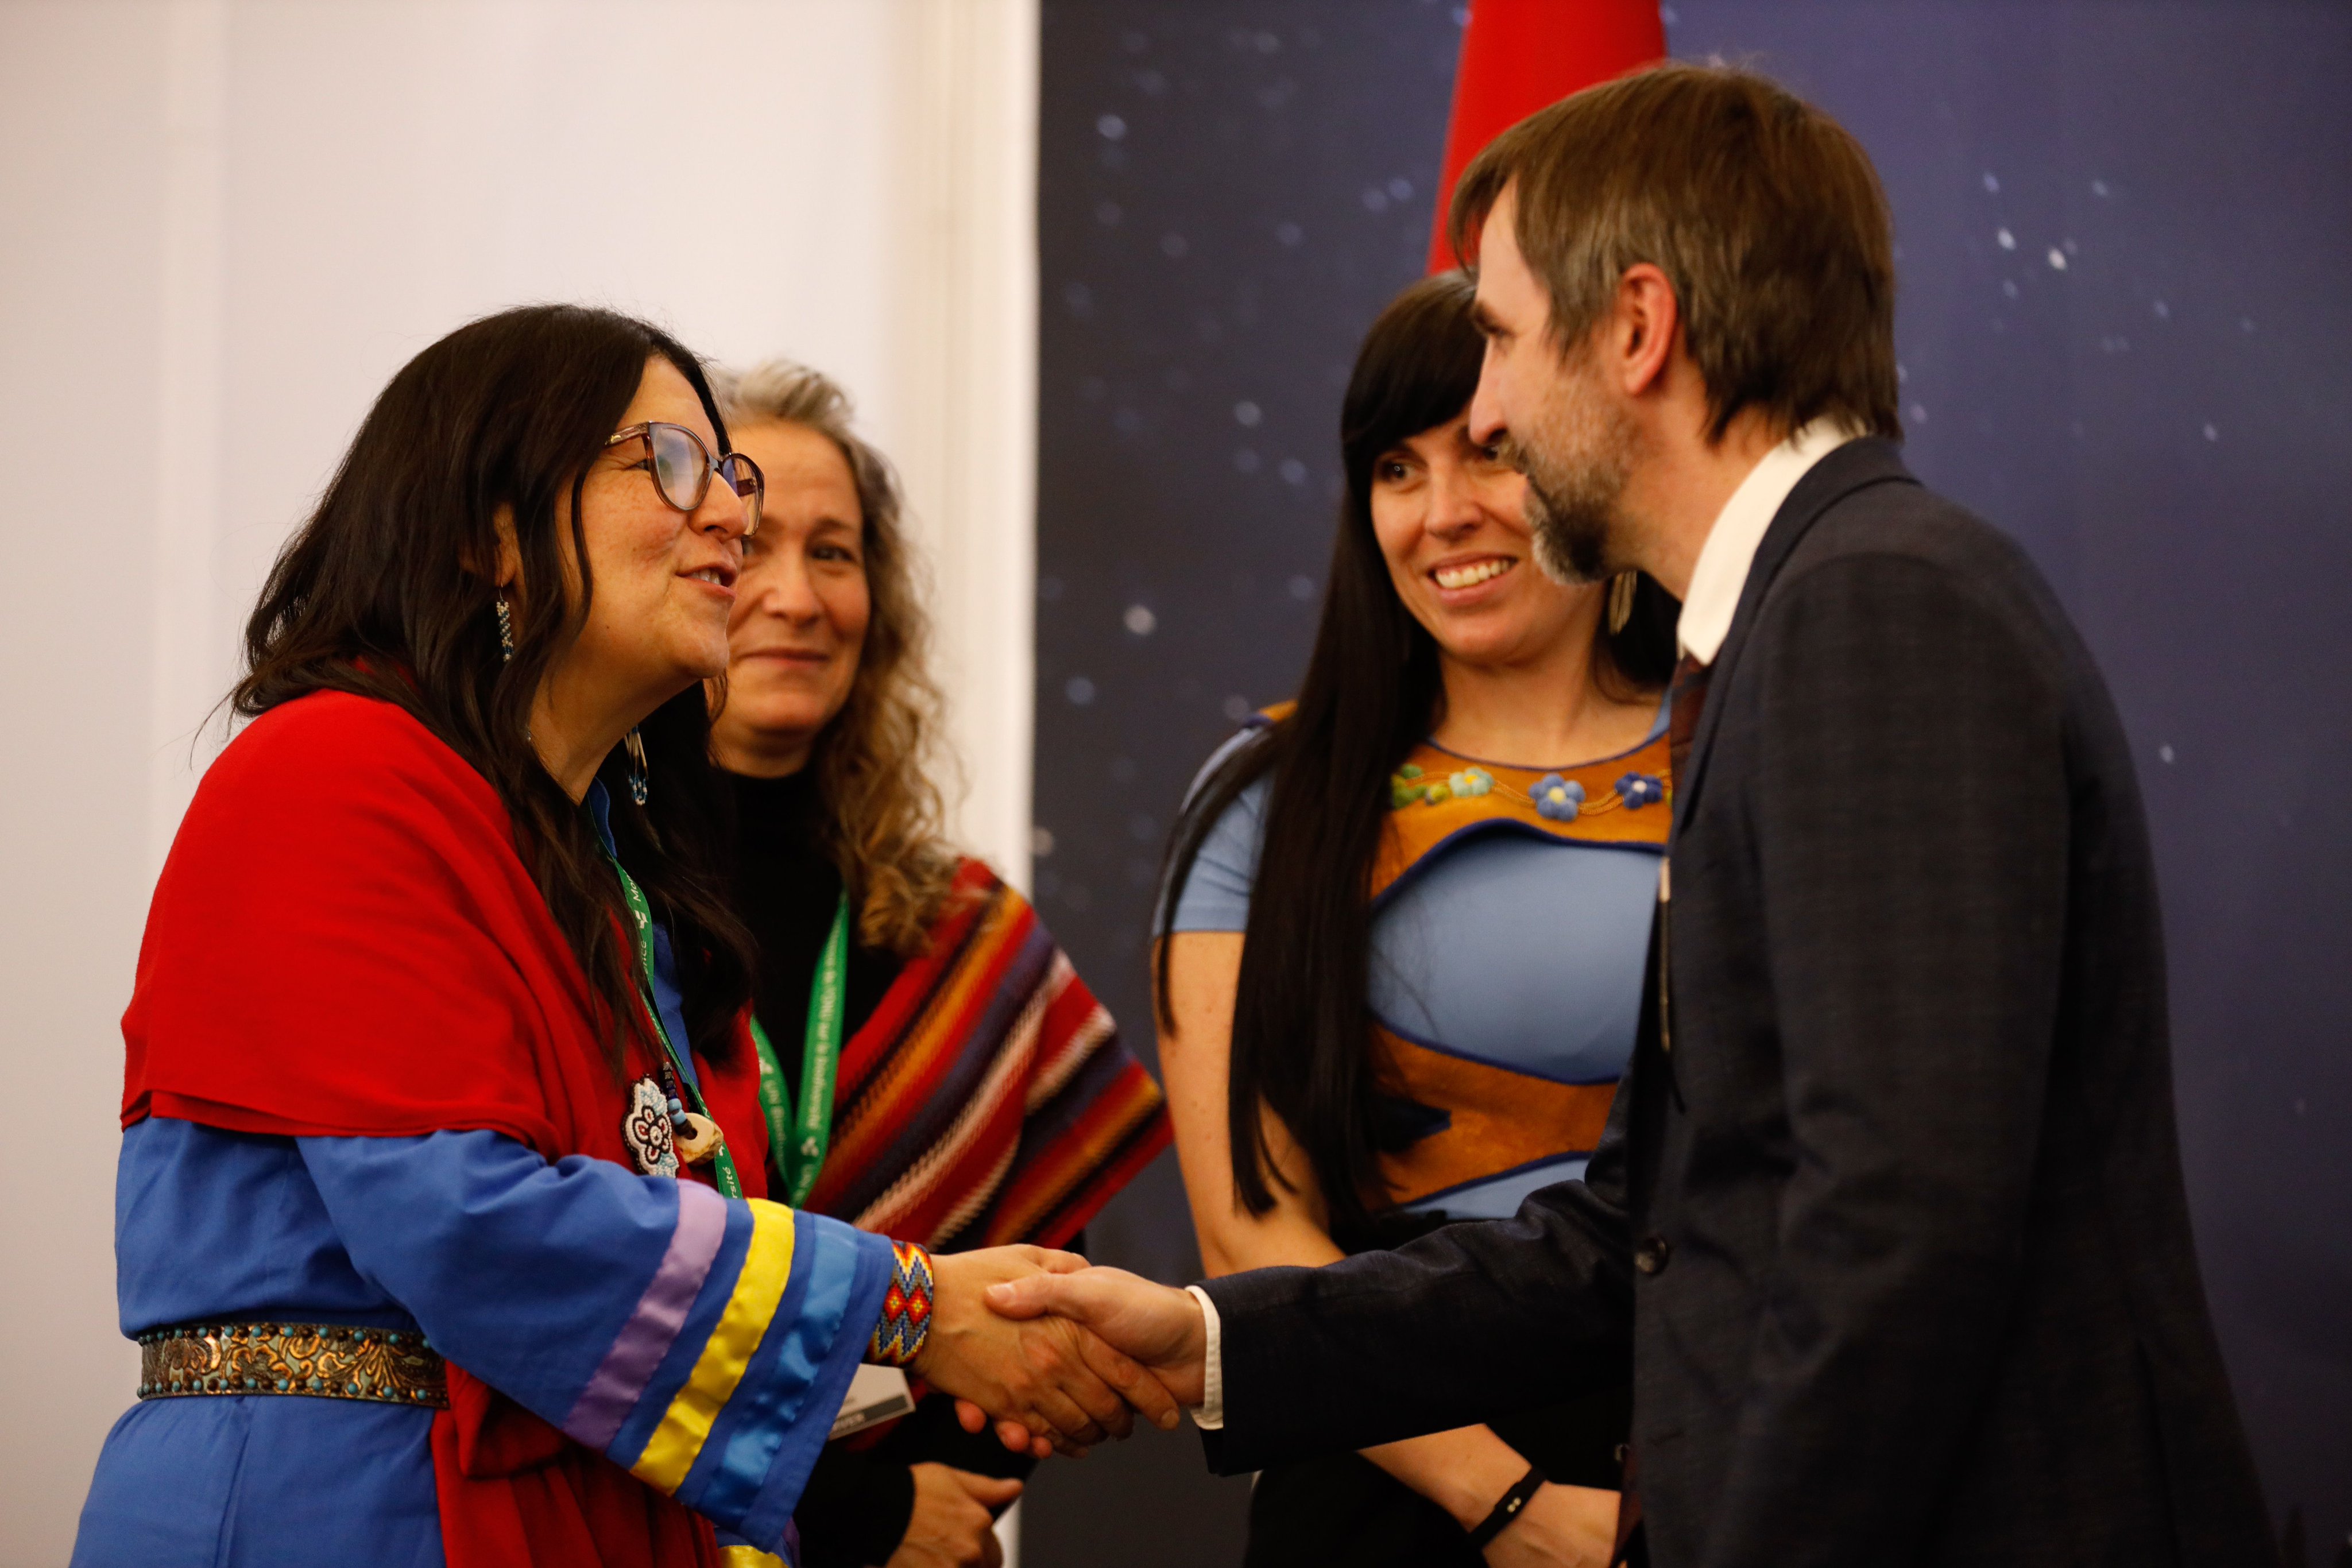 Minister Guilbeault shaking a woman's hand.